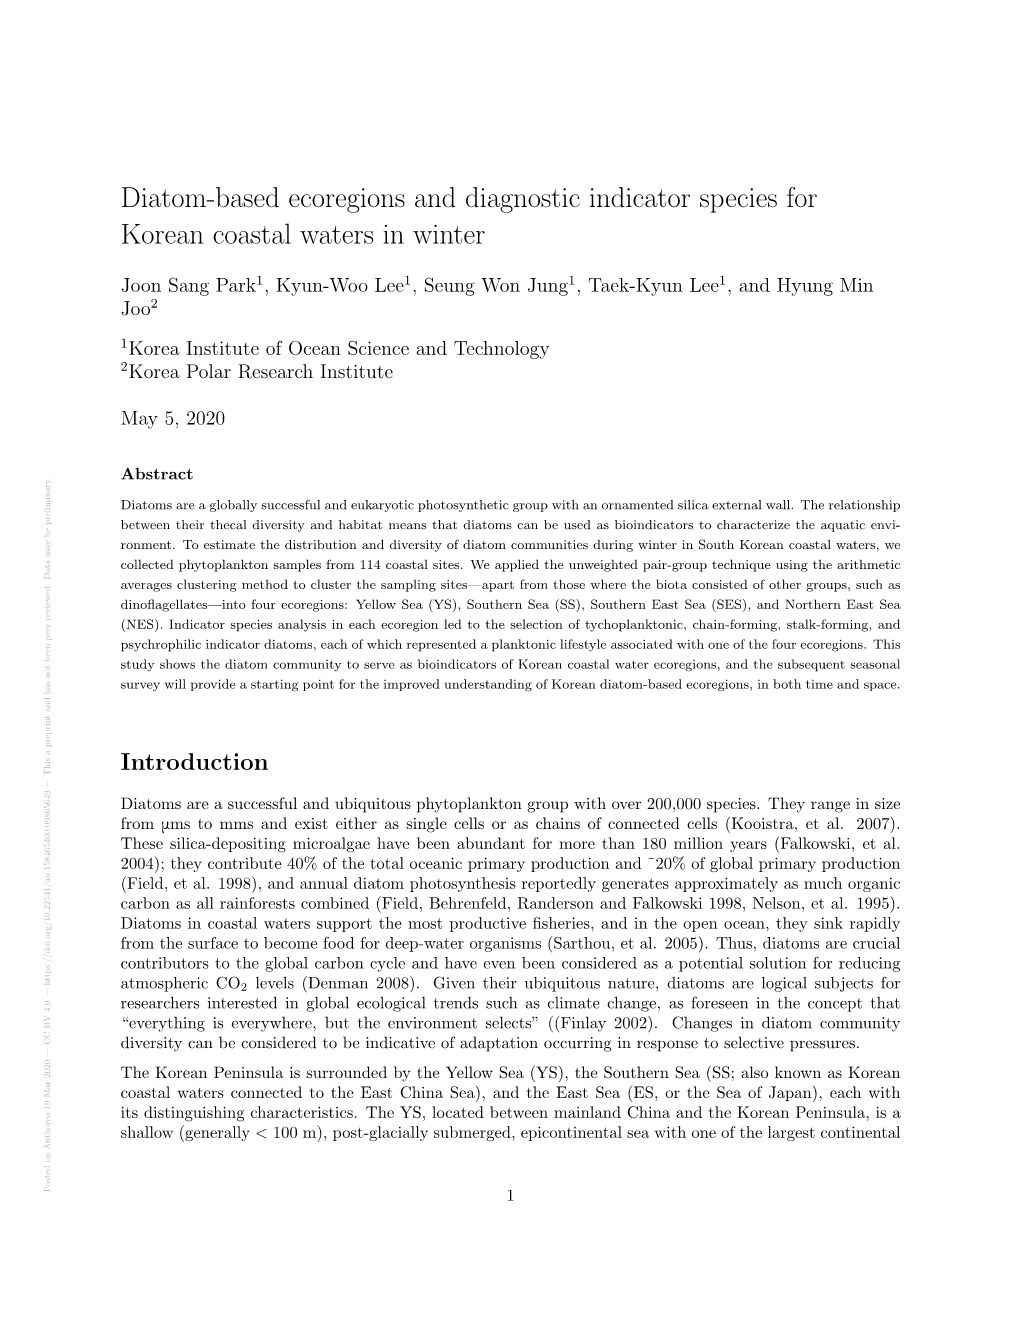 Diatom-Based Ecoregions and Diagnostic Indicator Species For